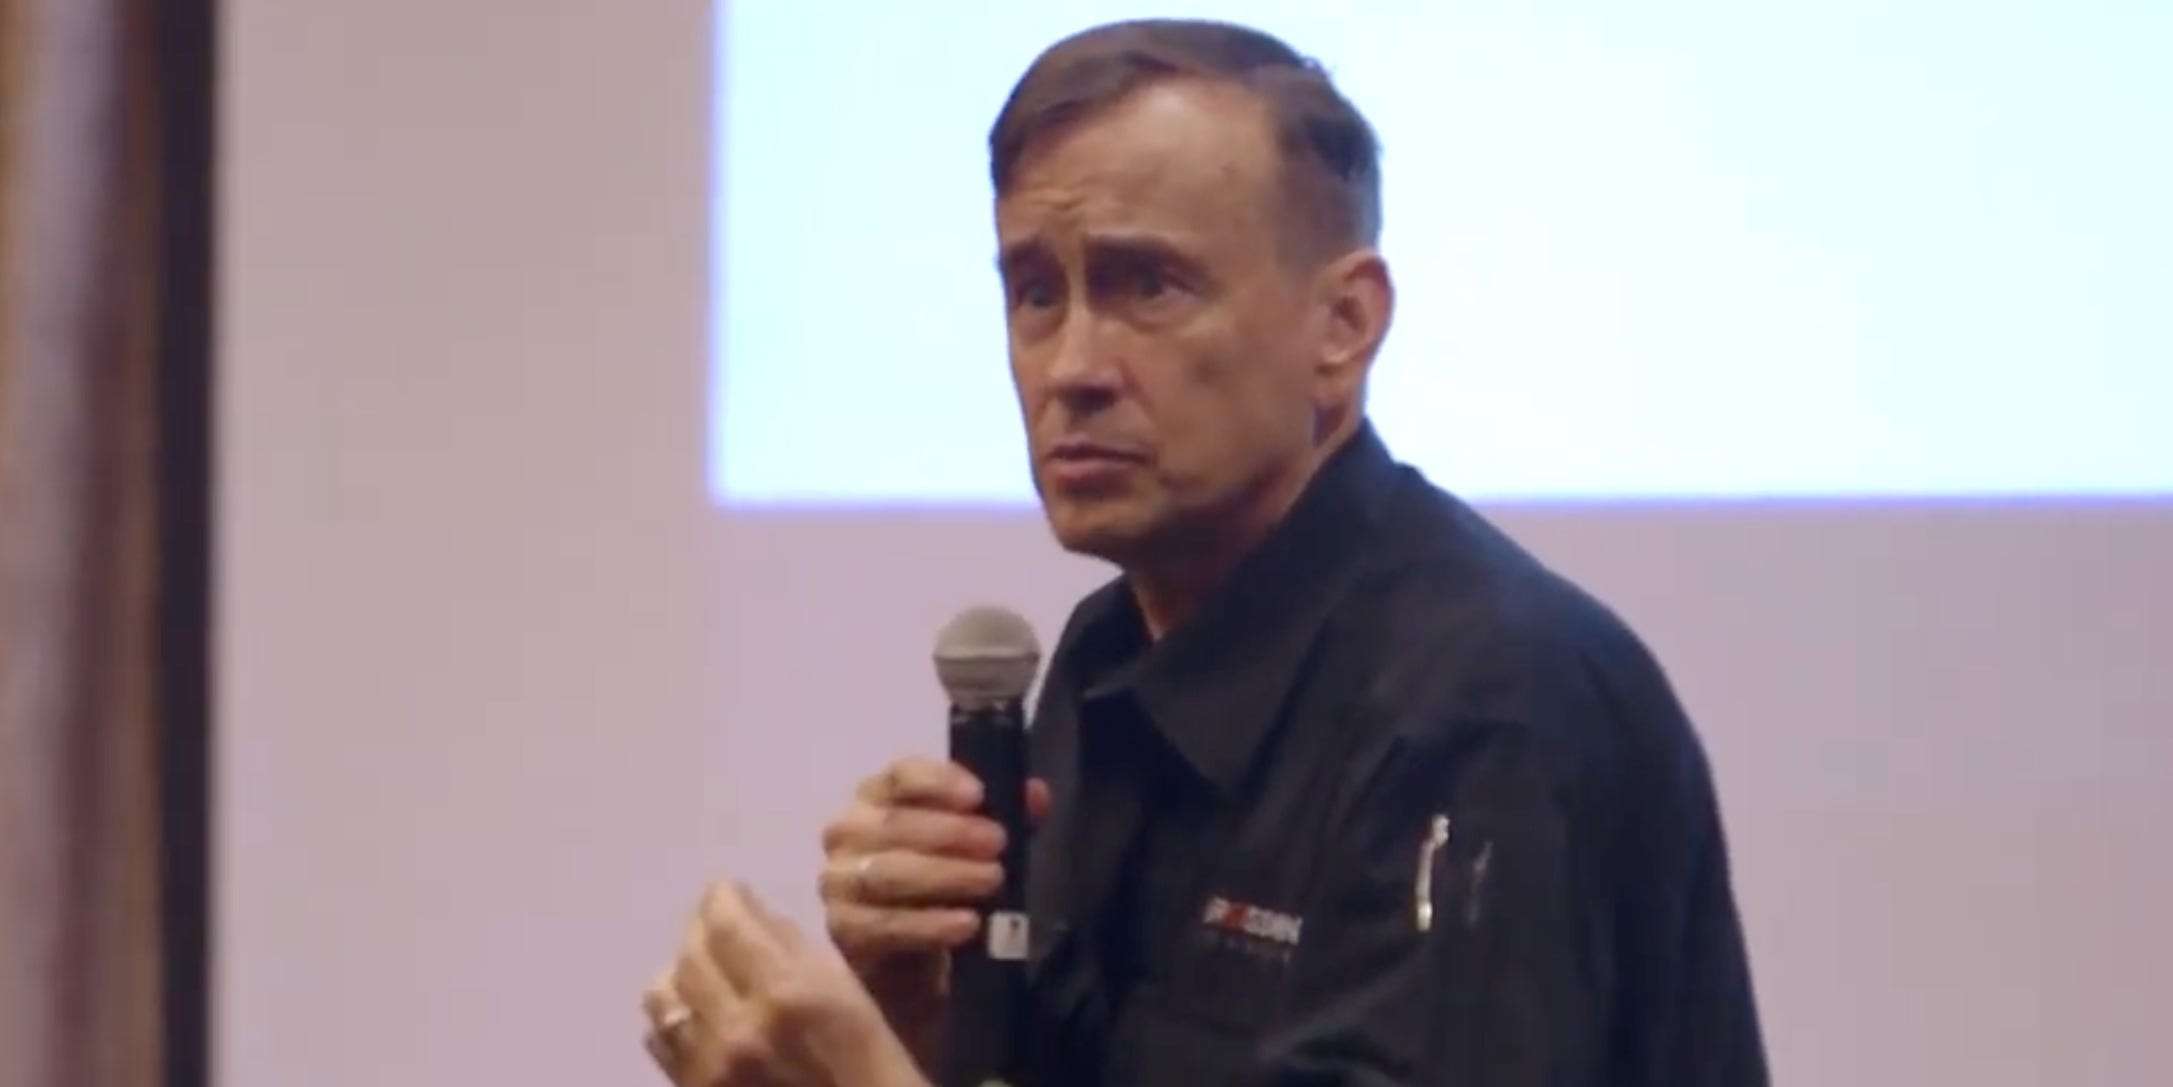 Police Trainer Dave Grossman Is Teaching Officers How To Kill Insider